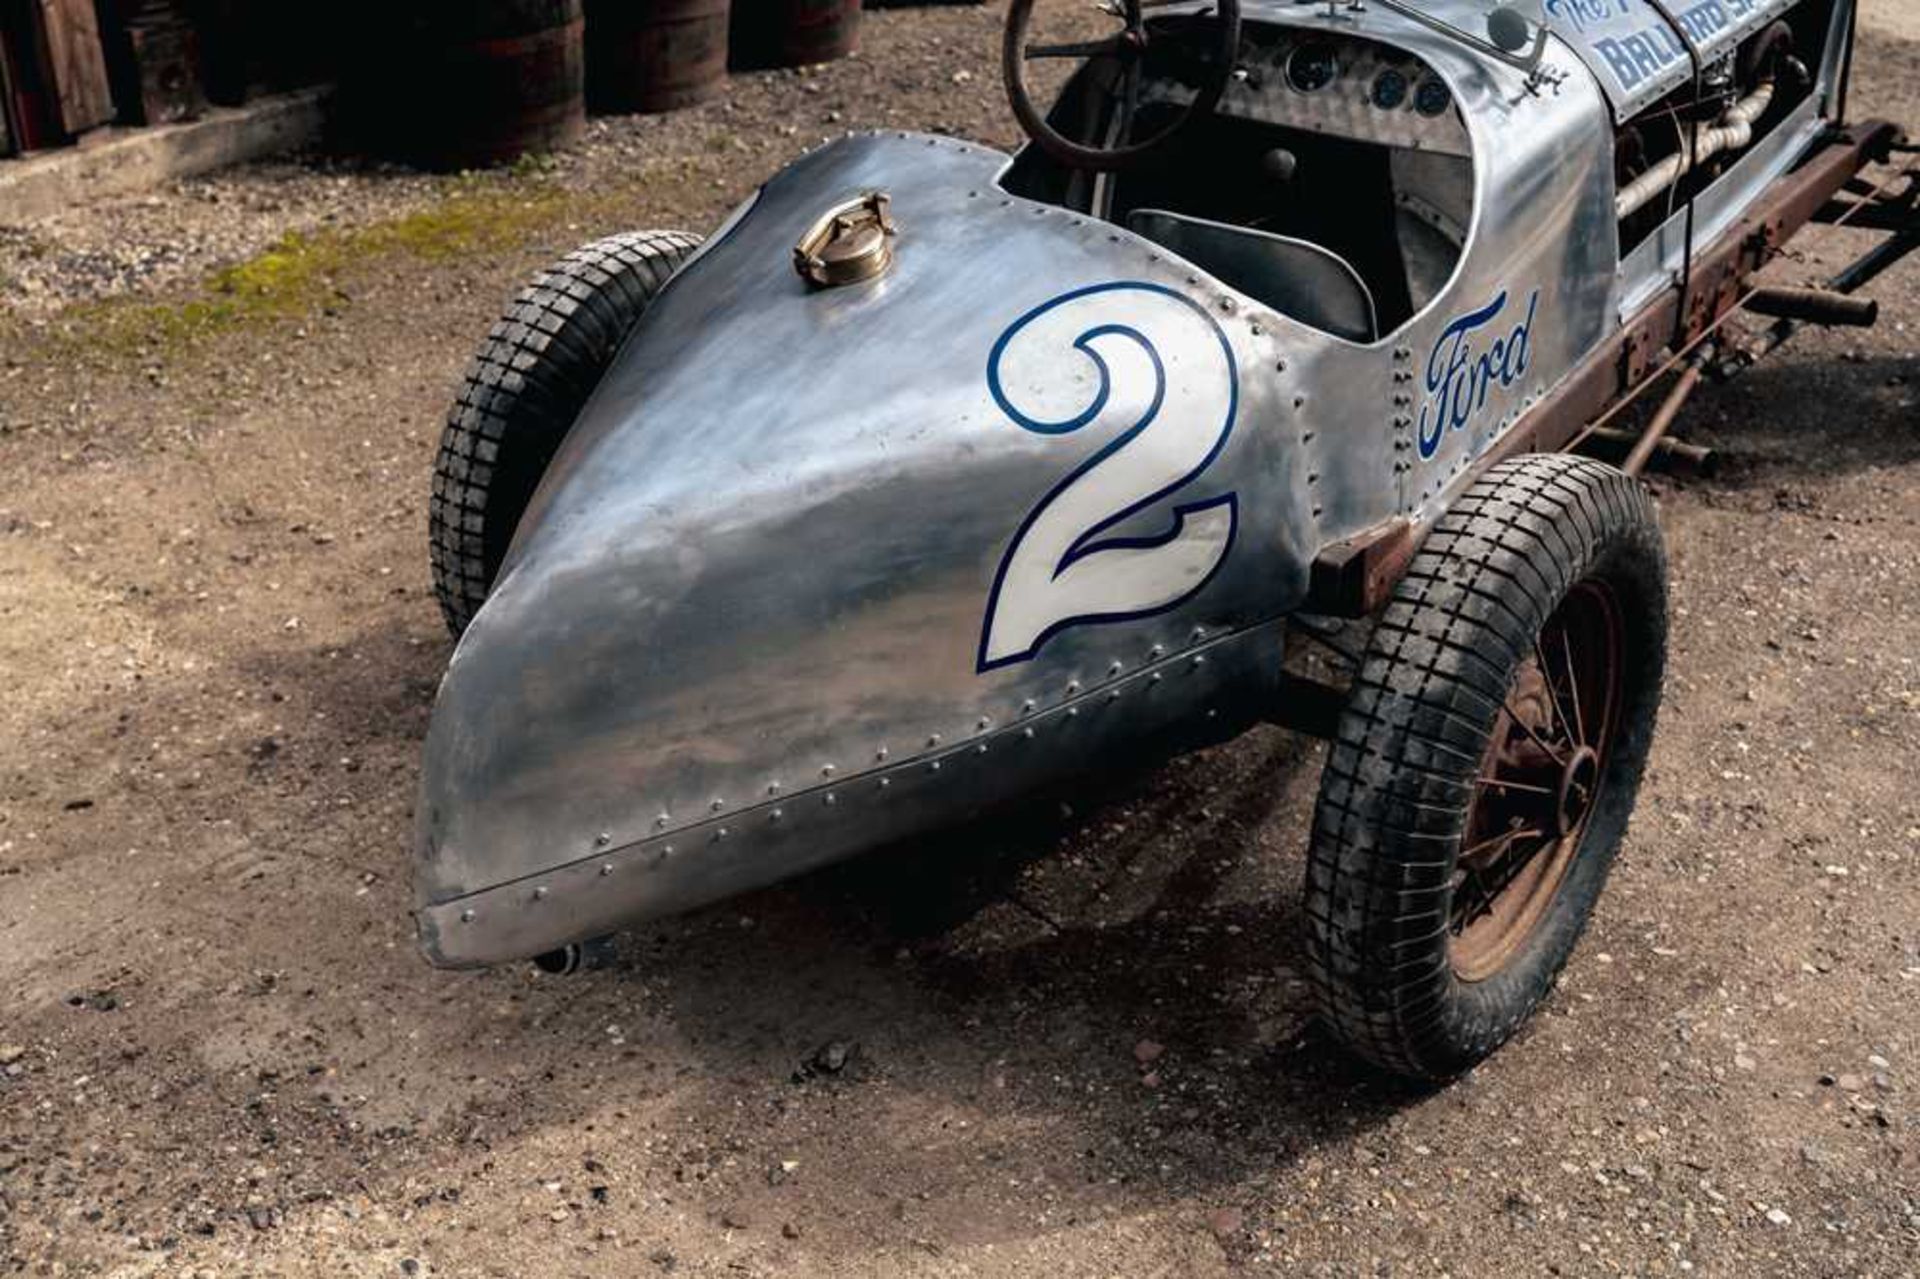 1930 Ford Model A "The Ballard Special" Speedster One off, bespoke built twin-engined pre-war racing - Image 20 of 94